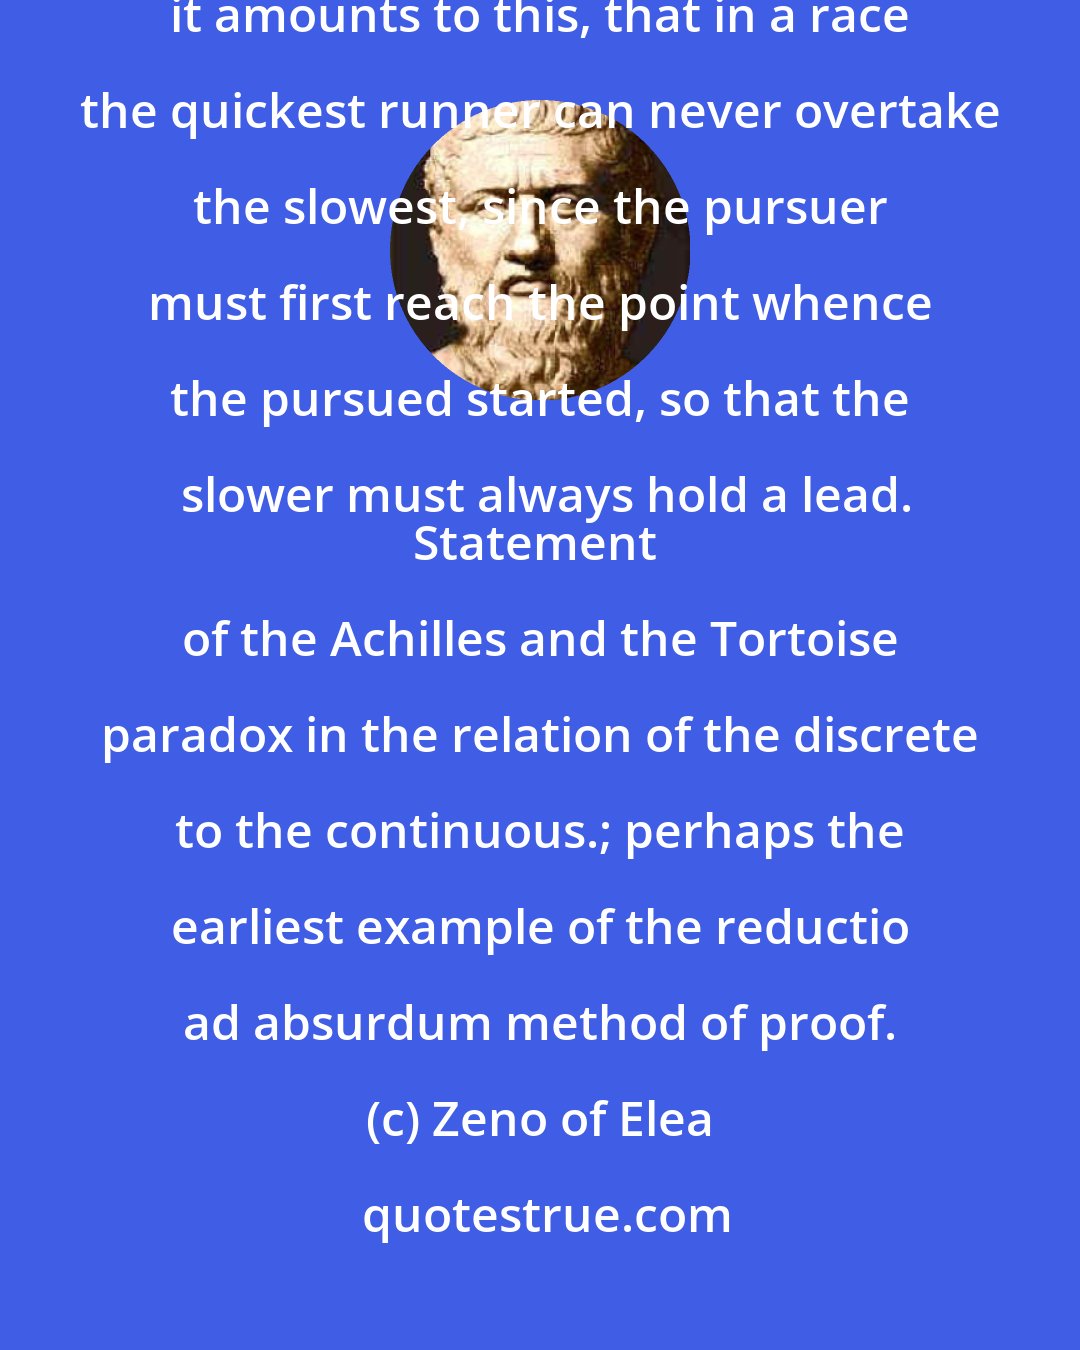 Zeno of Elea: The second [argument about motion] is the so-called Achilles, and it amounts to this, that in a race the quickest runner can never overtake the slowest, since the pursuer must first reach the point whence the pursued started, so that the slower must always hold a lead.
Statement of the Achilles and the Tortoise paradox in the relation of the discrete to the continuous.; perhaps the earliest example of the reductio ad absurdum method of proof.